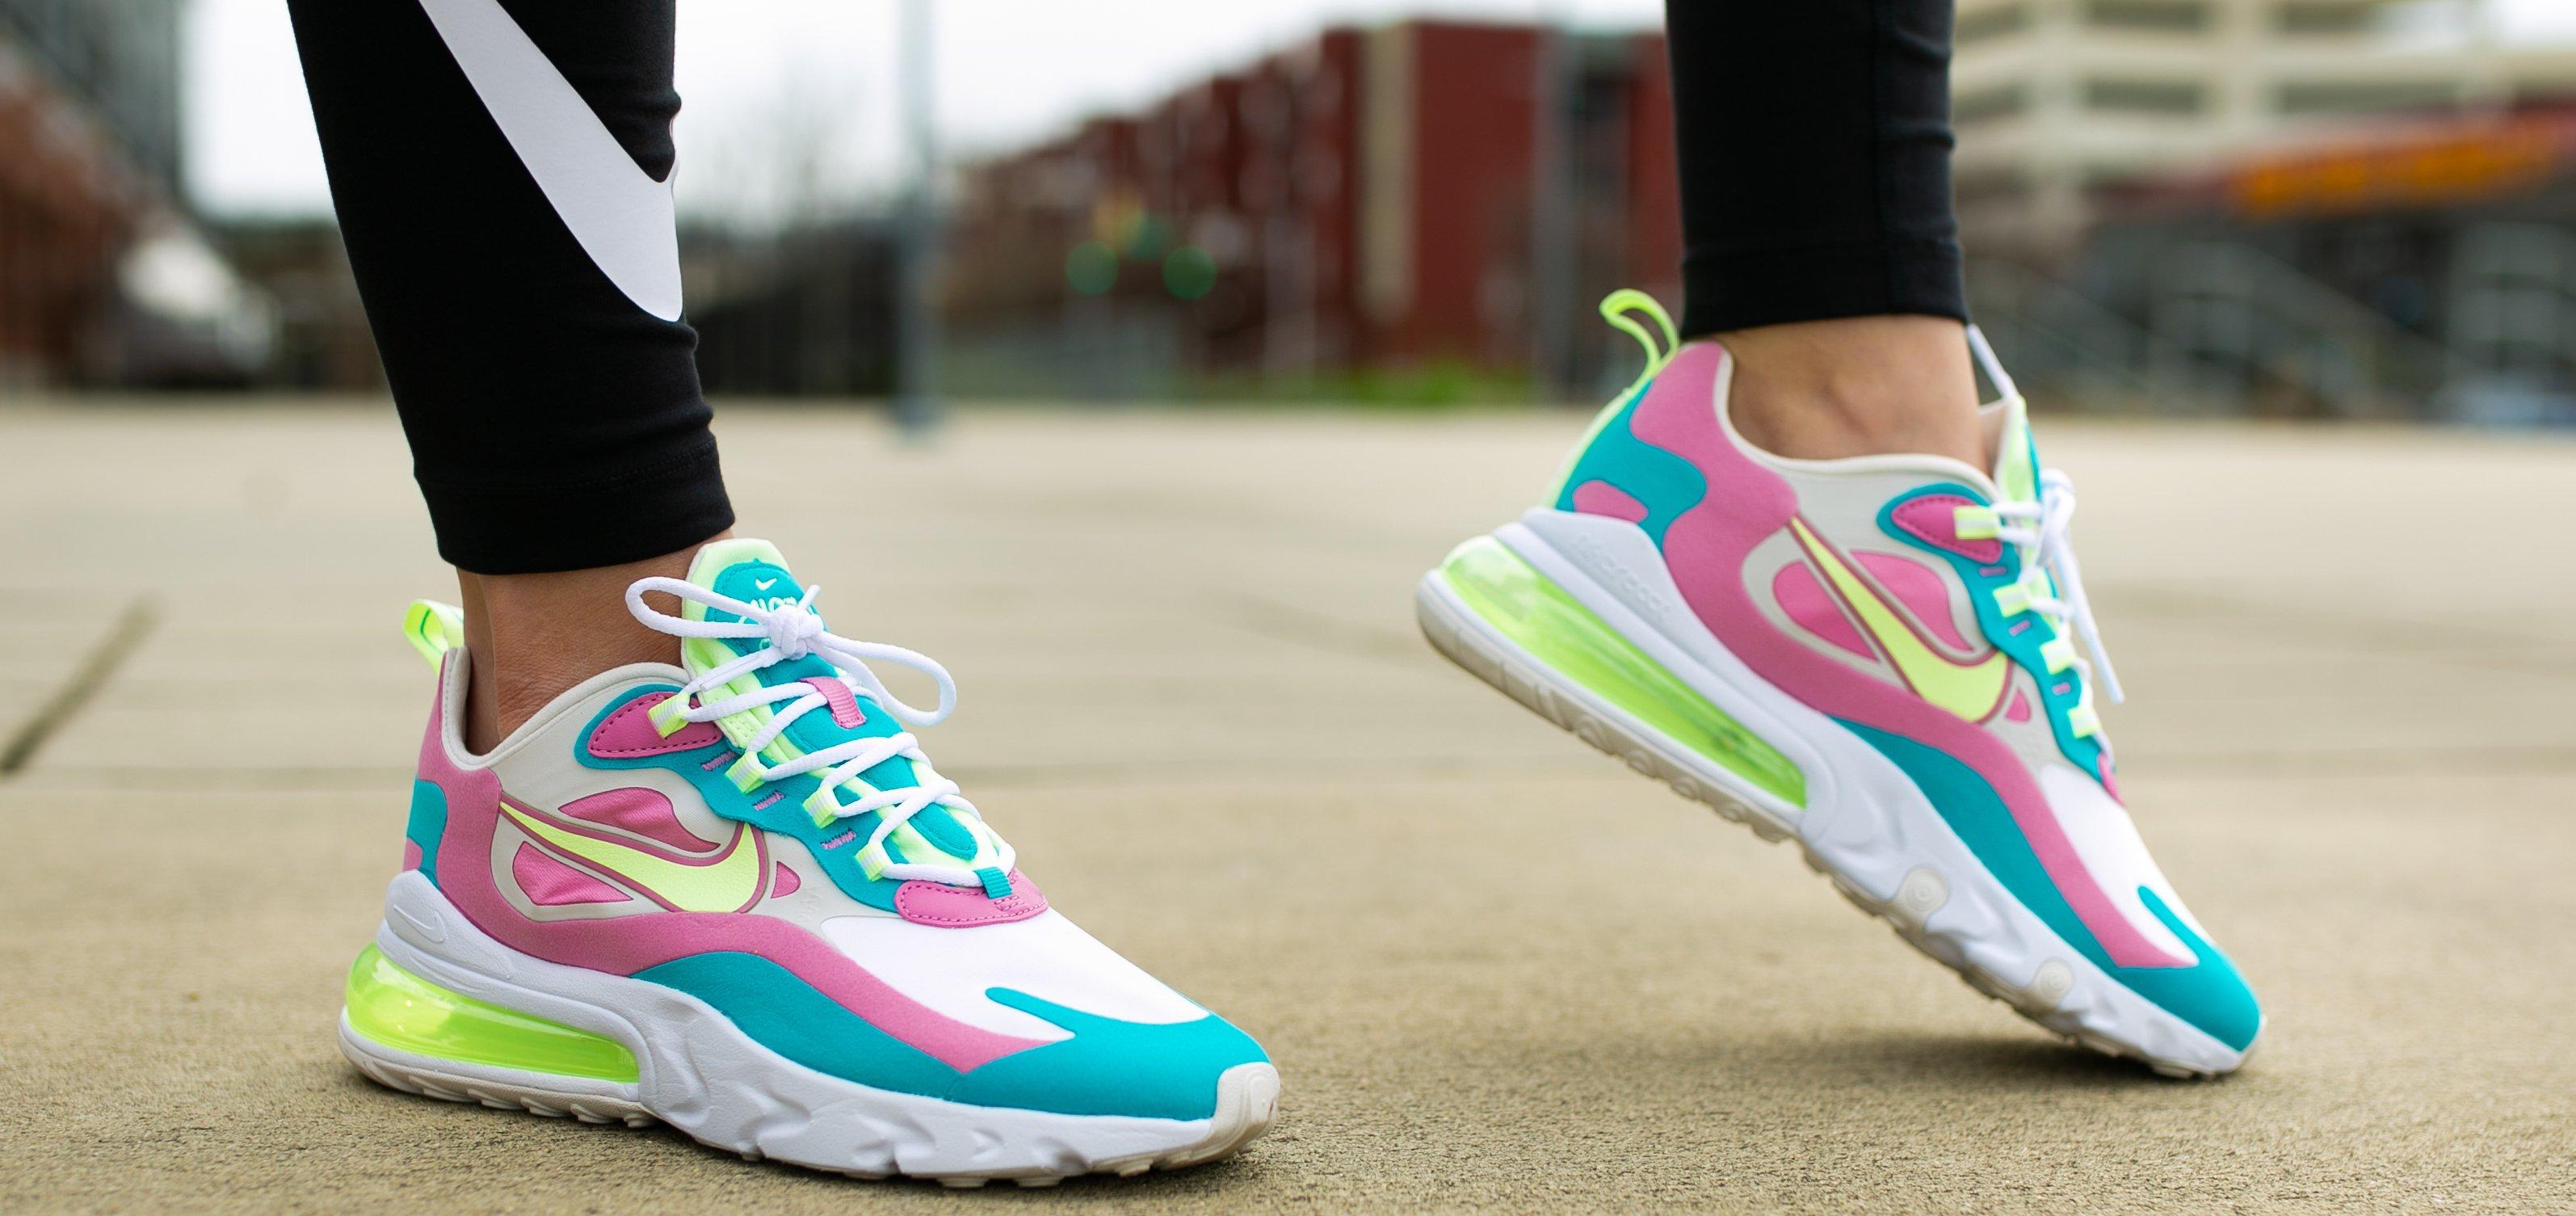 Which Air Max Model Matches Your Personality?